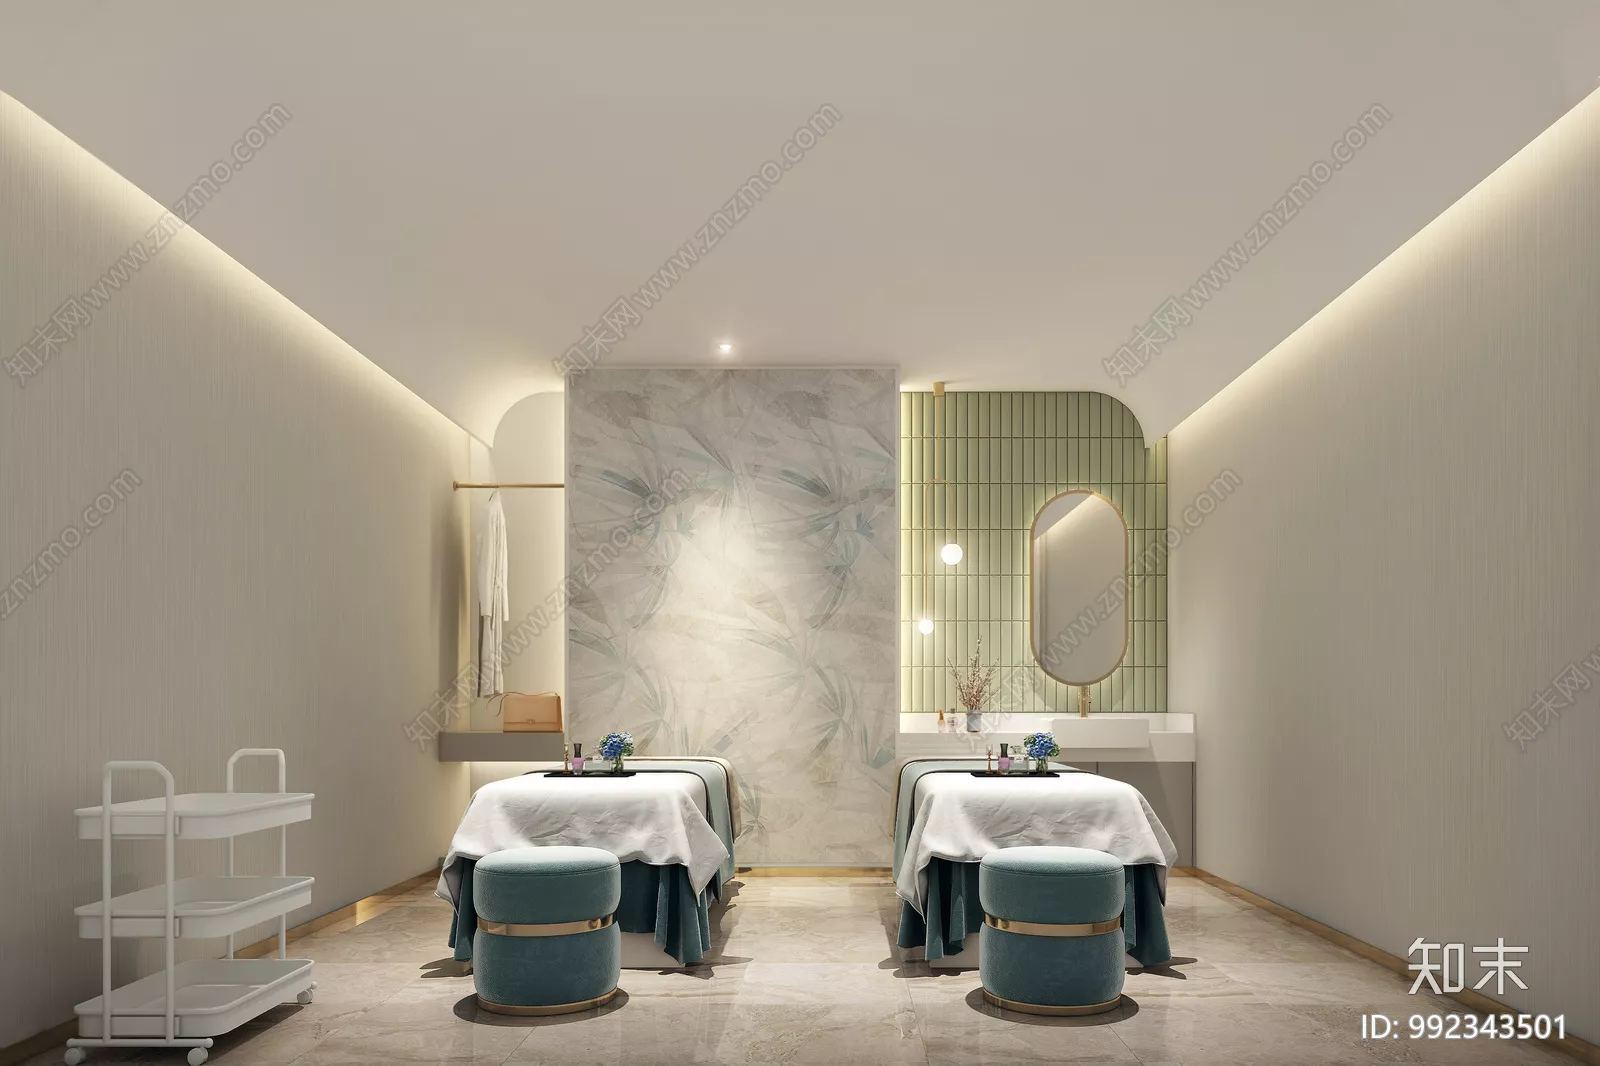 MODERN SPA AND BEAUTY - SKETCHUP 3D SCENE - VRAY OR ENSCAPE - ID14057